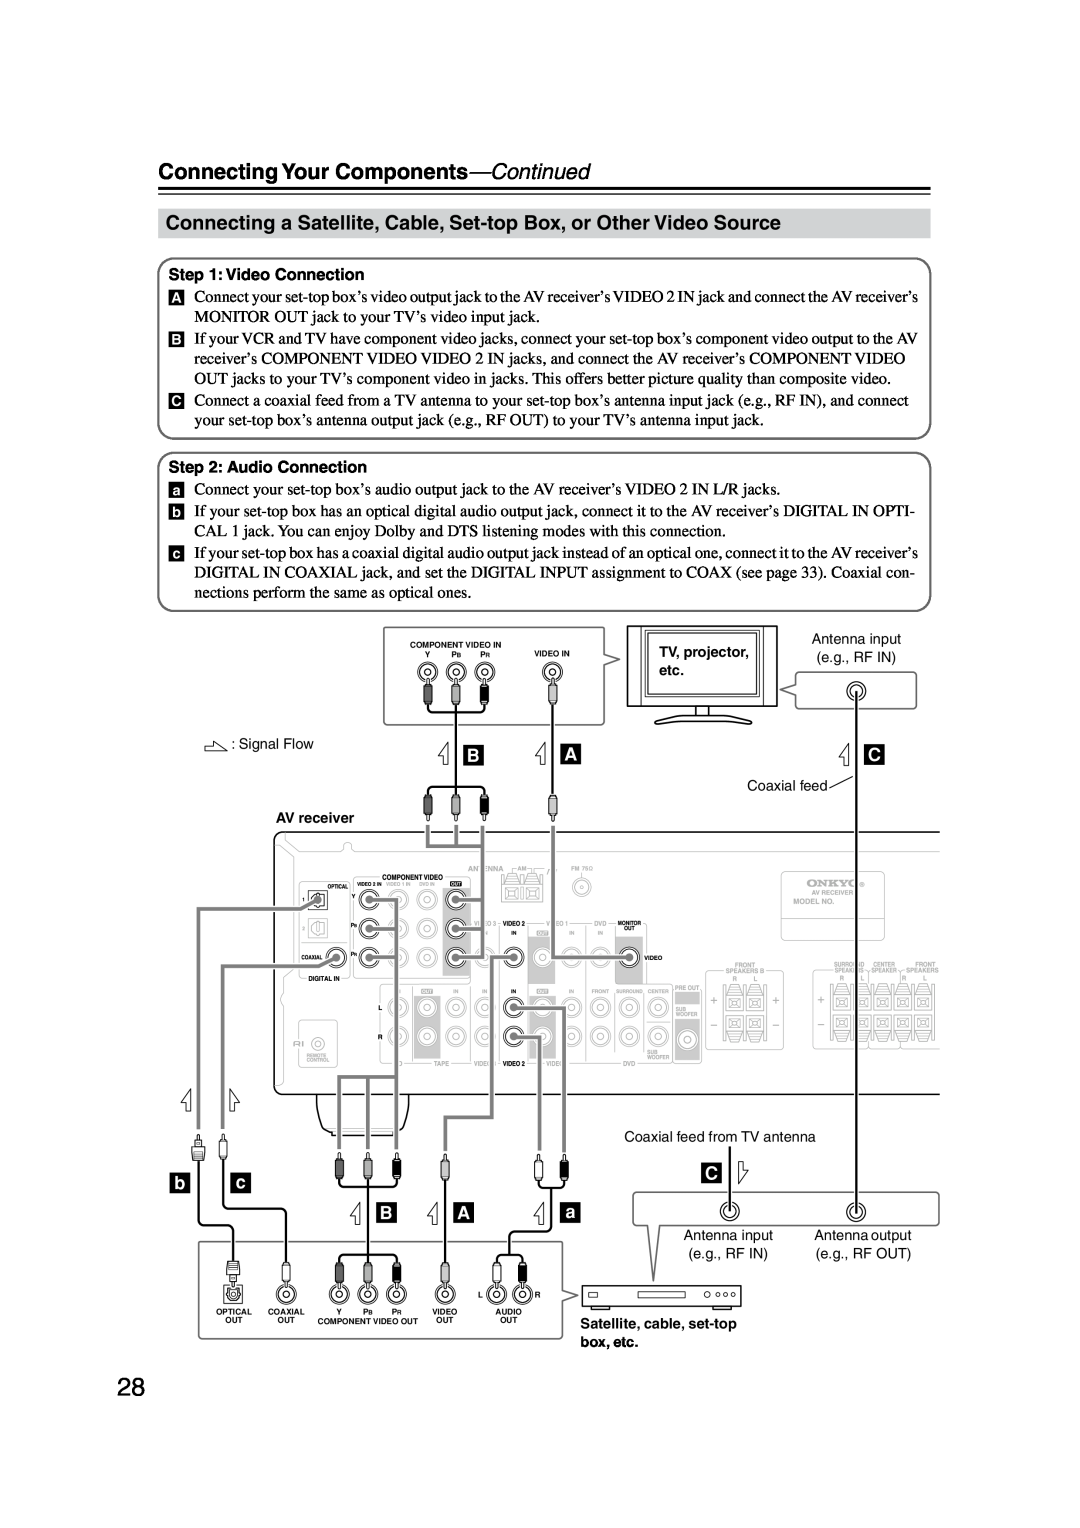 Onkyo TX-SR304 instruction manual Connecting Your Components-Continued, e.g., RF IN, Satellite, cable, set-topbox, etc 